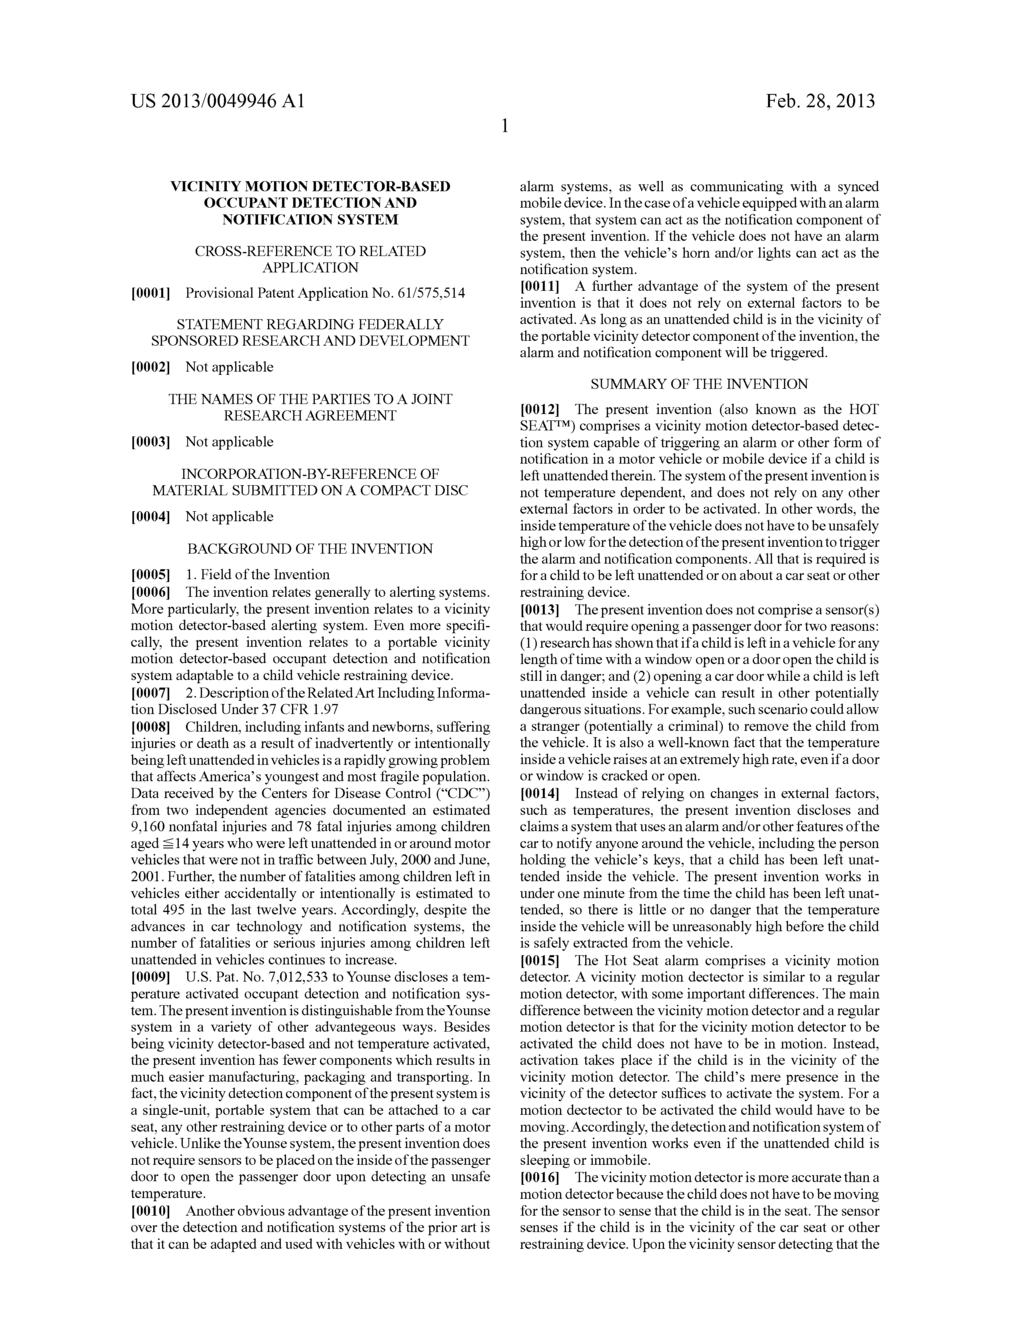 US 2013/004994.6 A1 Feb. 28, 2013 VCINITY MOTON DETECTOR-BASED OCCUPANT DETECTION AND NOTIFICATION SYSTEM CROSS-REFERENCE TO RELATED APPLICATION 0001 Provisional Patent Application No.